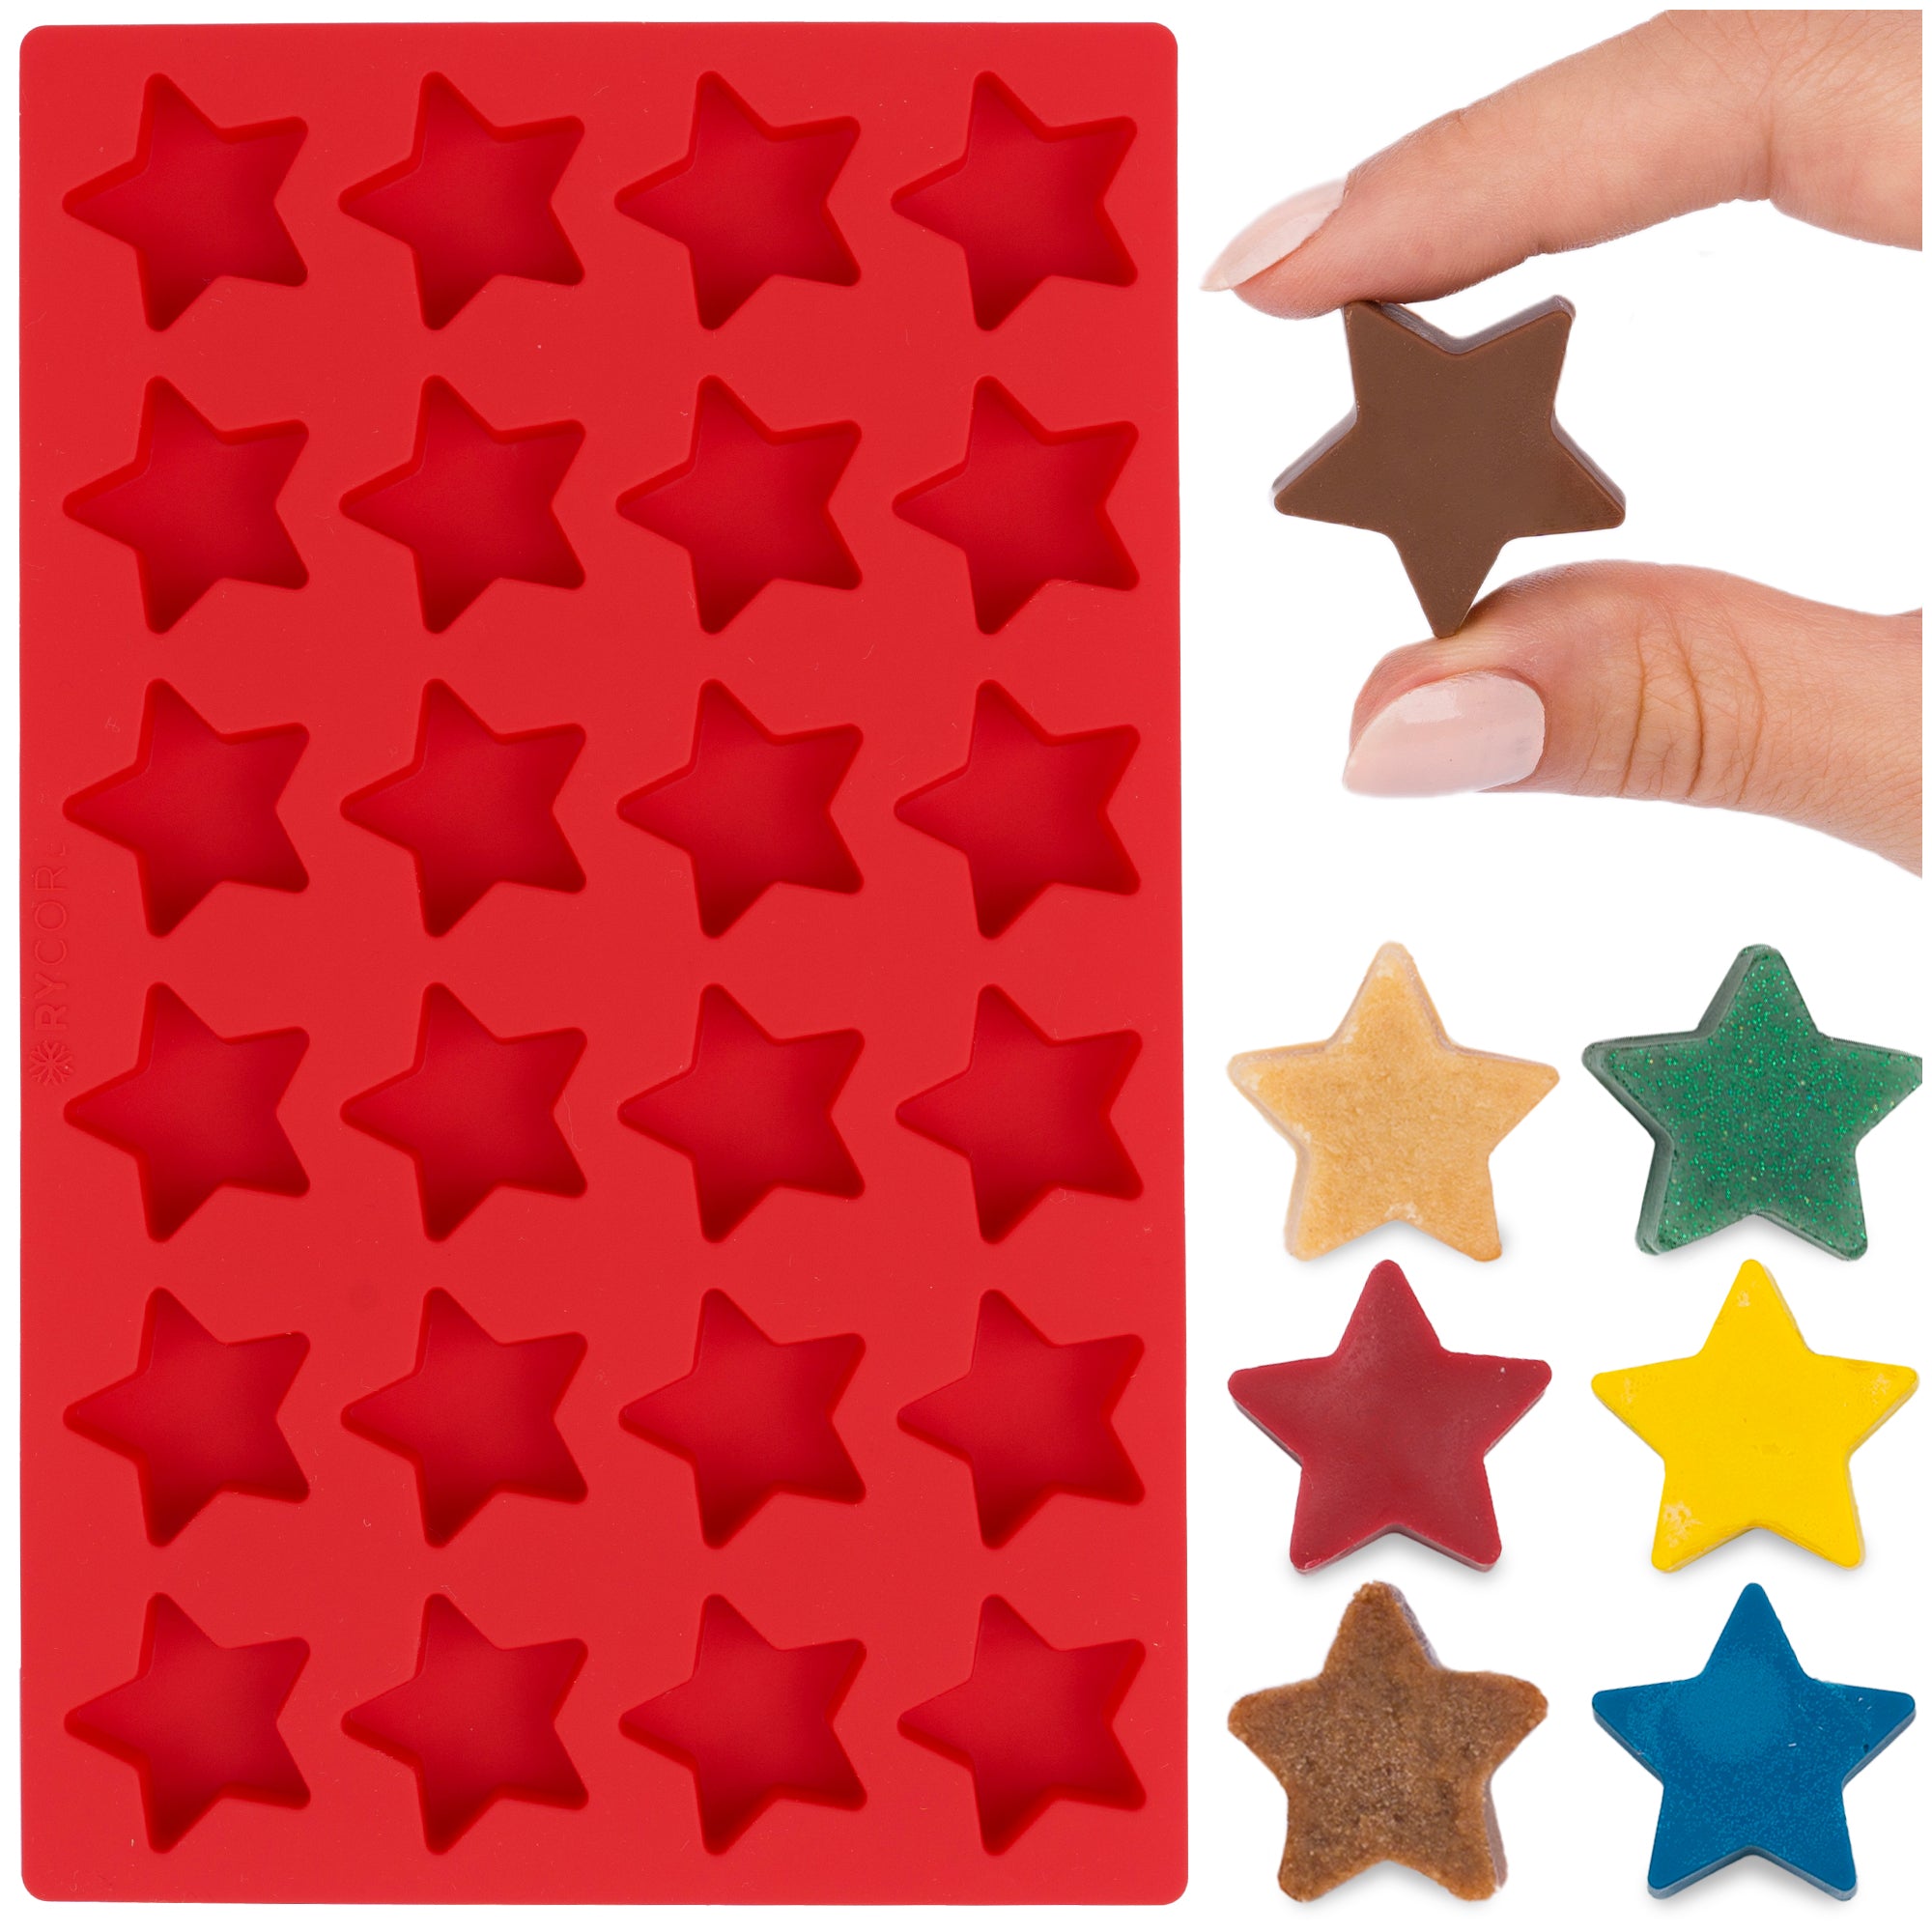 Mini Star Silicone Mold for Chocolates, Candies & Desserts - Silicone Star Molds Baking Treats - Durable Star Mold for Ice Cubes, Festive Baking - Perfect for Star Shaped Chocolates and Cupcakes